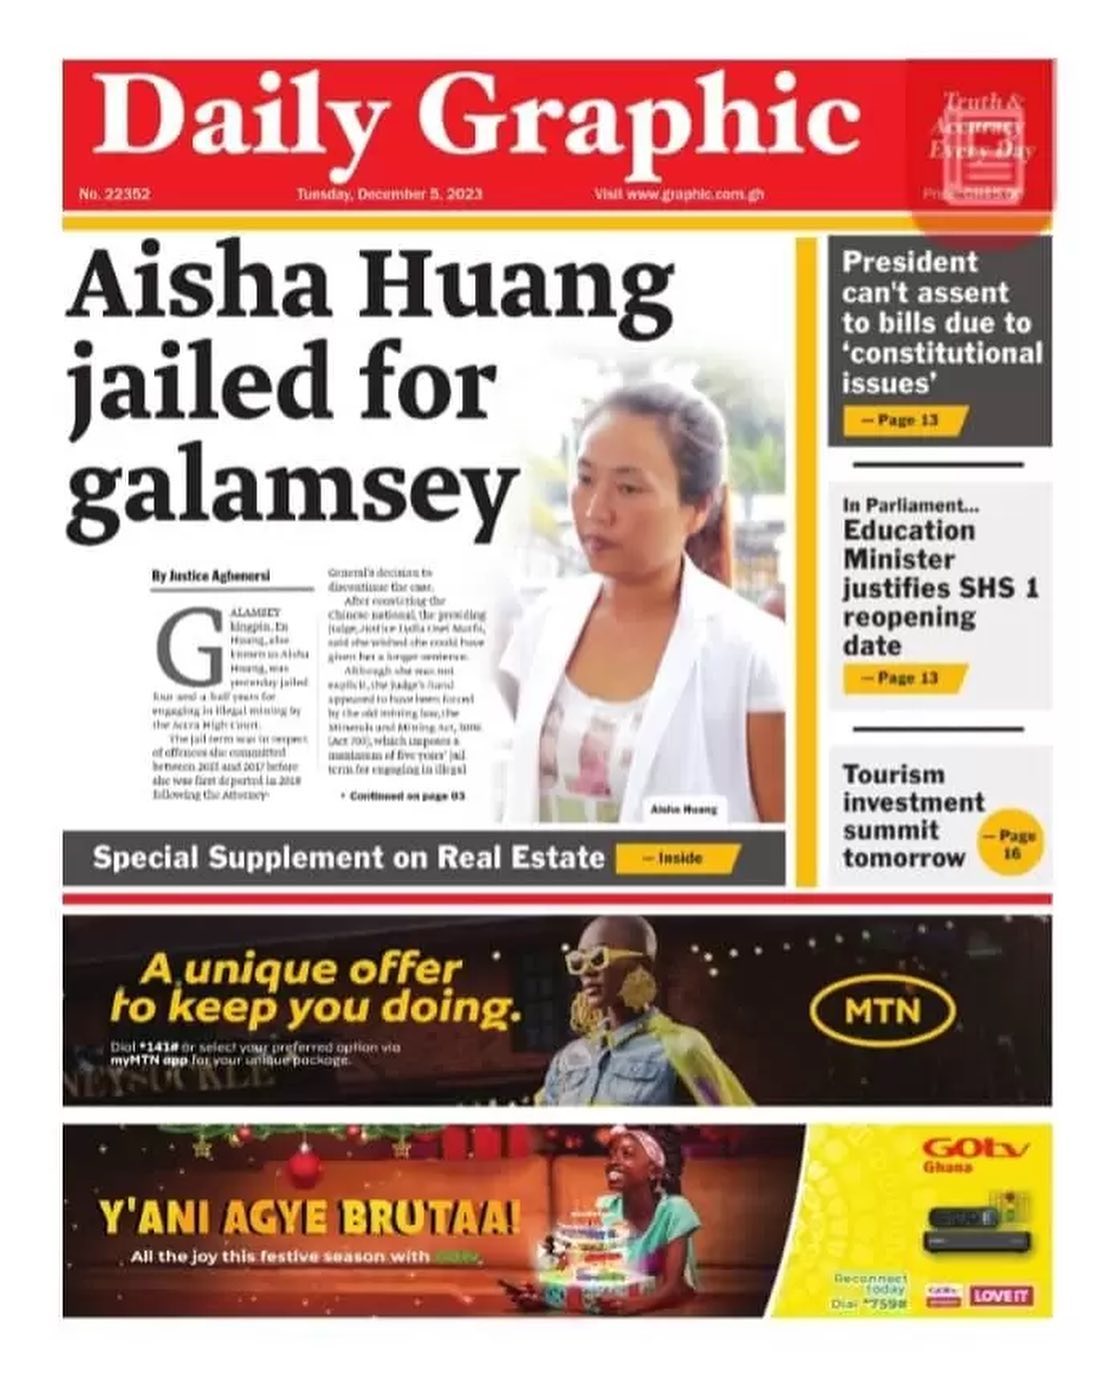 Daily Graphic Newspaper - December 5